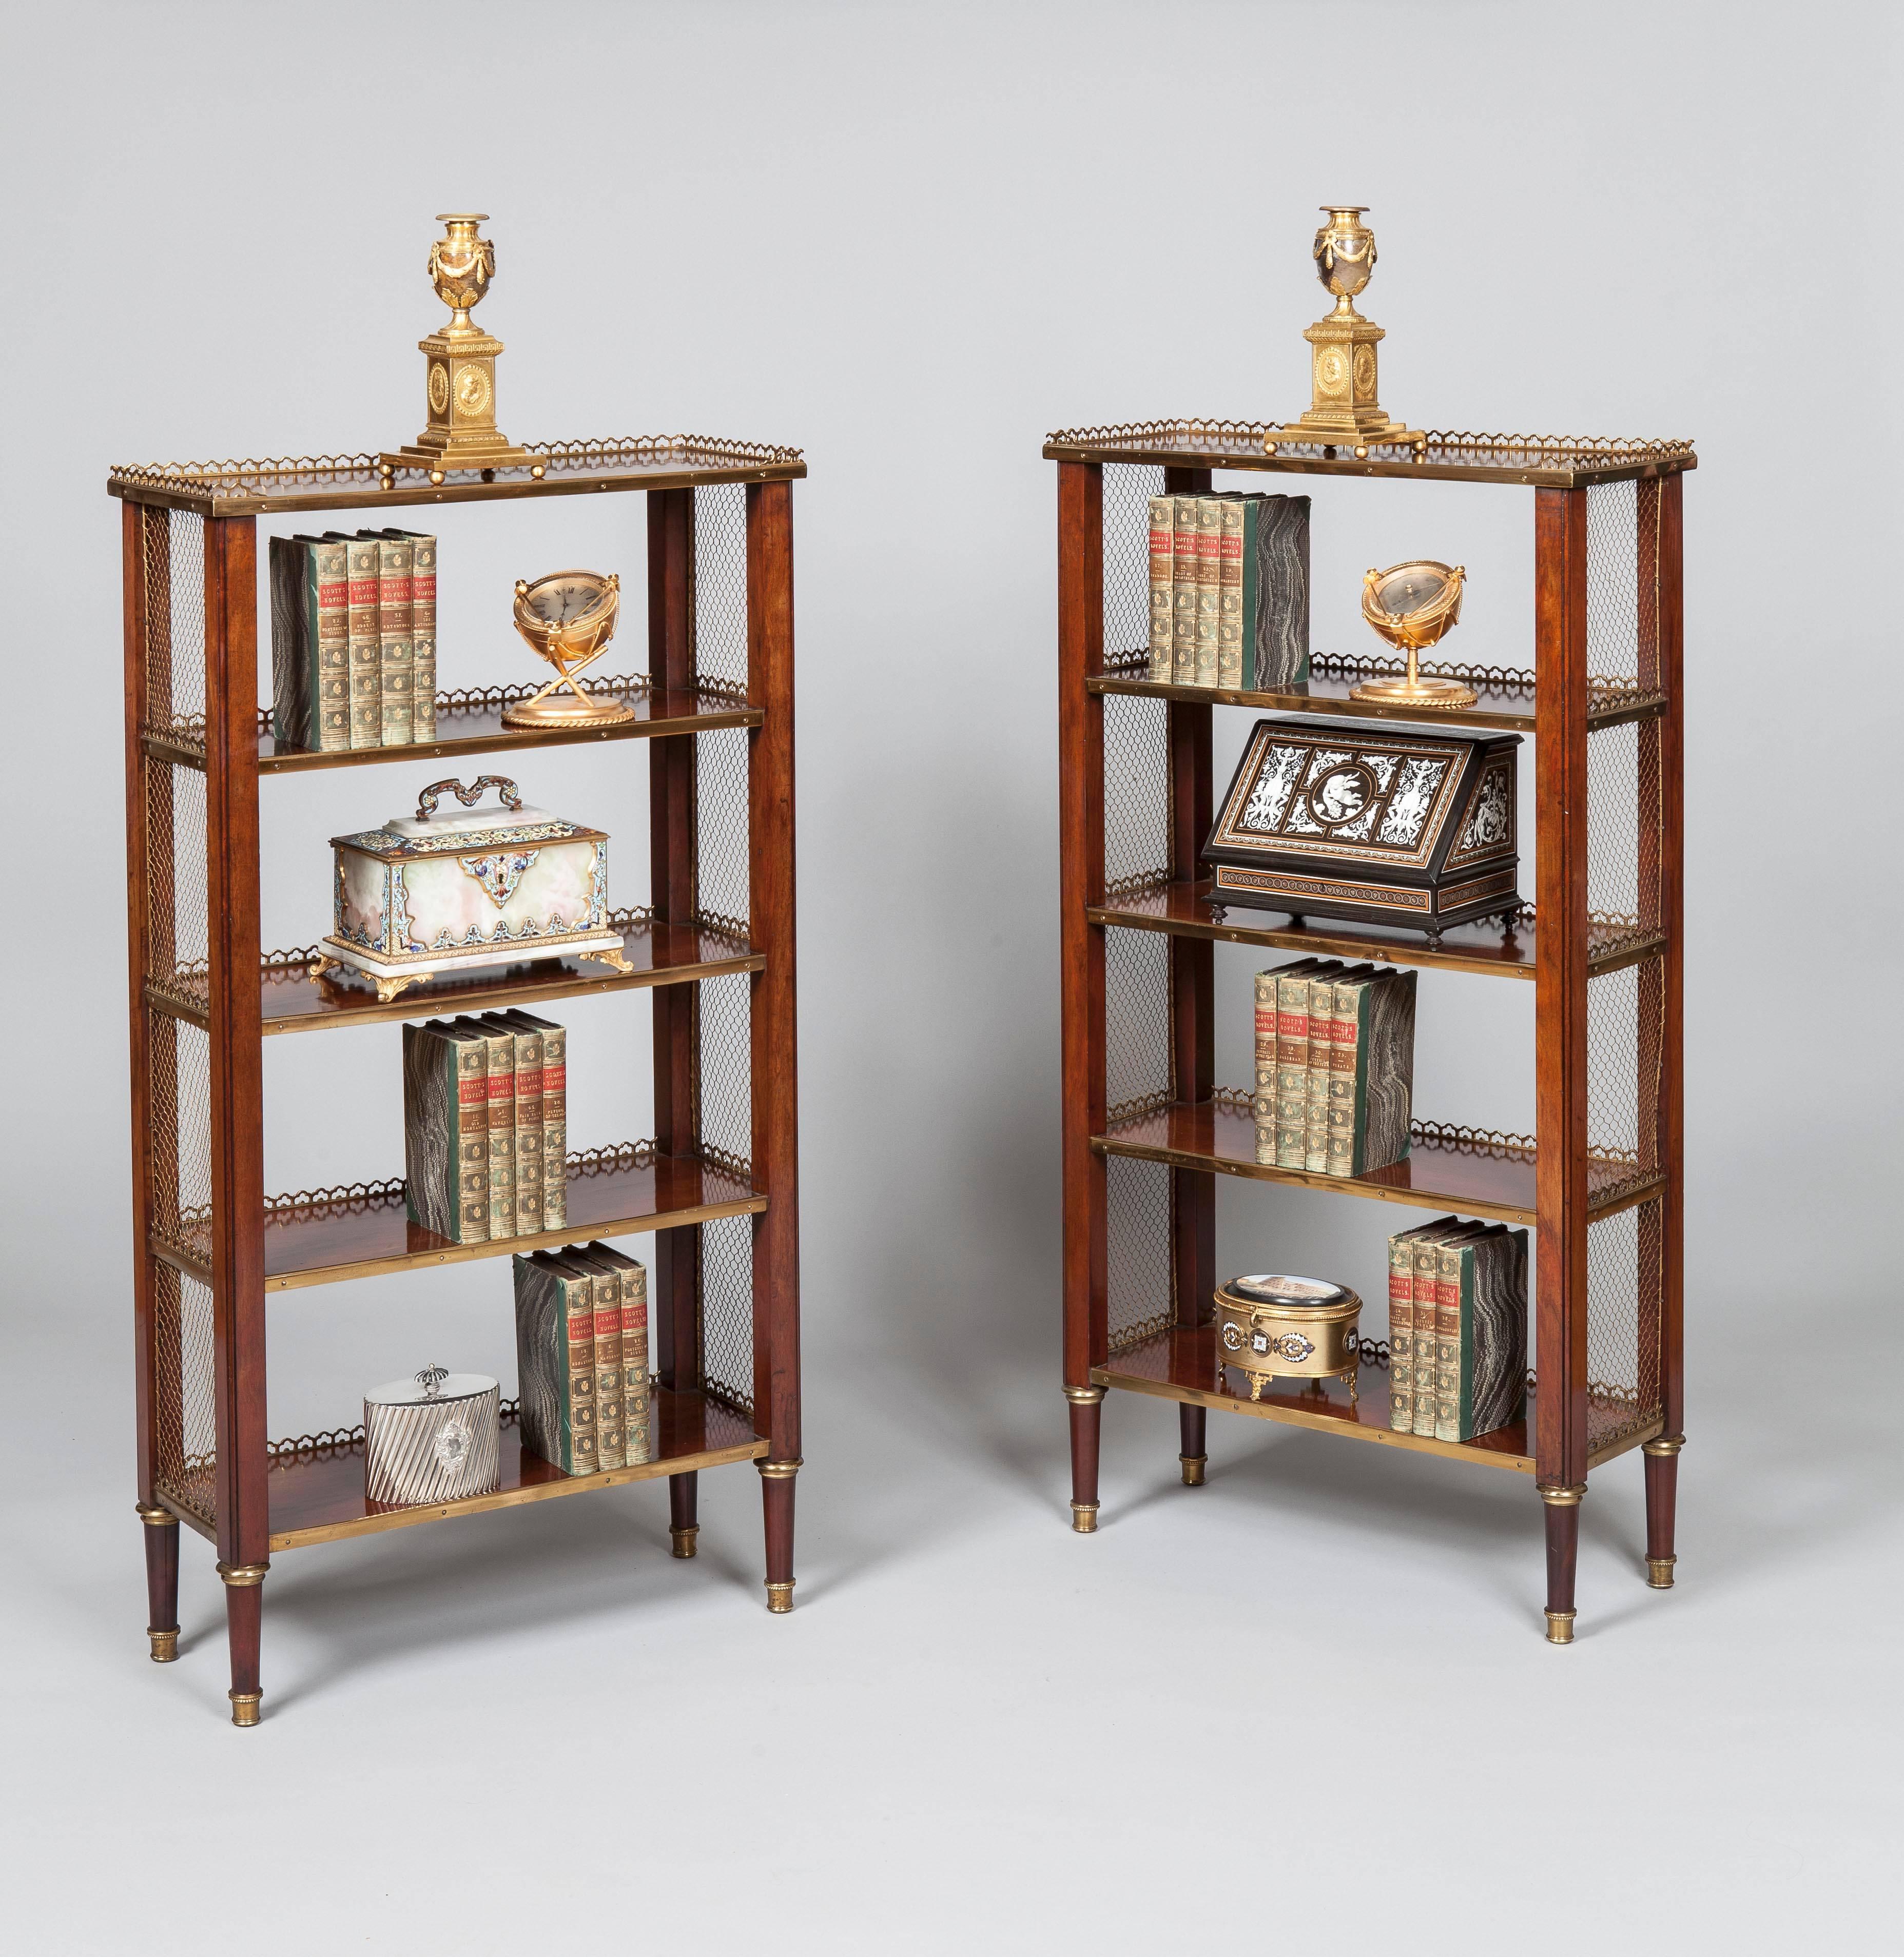 A pair of Petit Bibliotheques in the manner of Adam Weisweiler

constructed using a finely patinated mahogany, brass and bronze; rising from bronze shod turned and tapering circular legs supporting shaped square section reeded angles, each of which